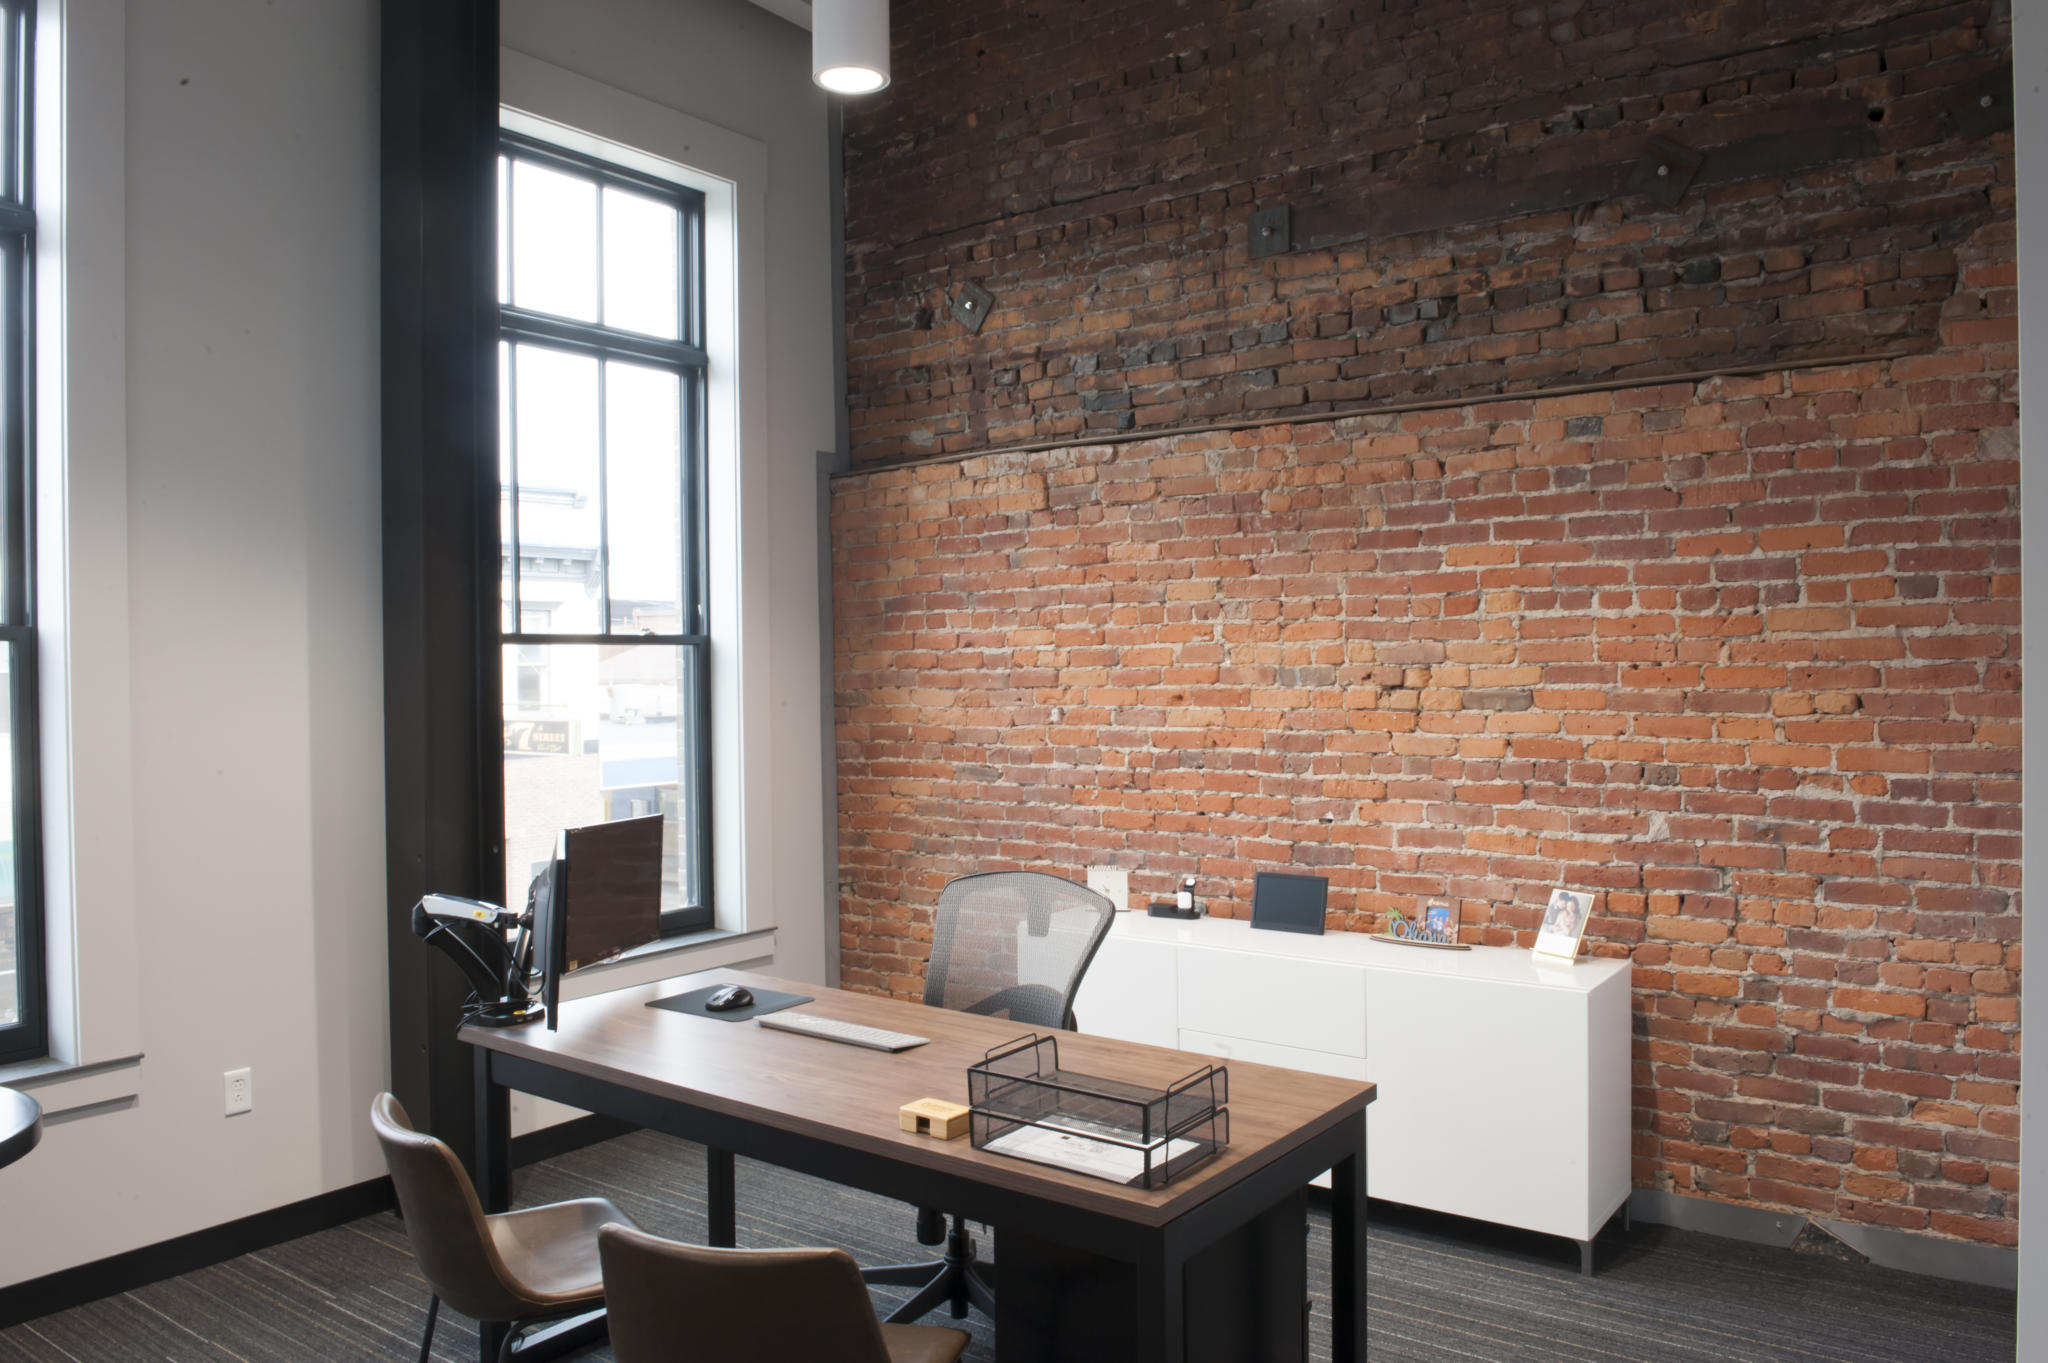 an image of an office with brick walls